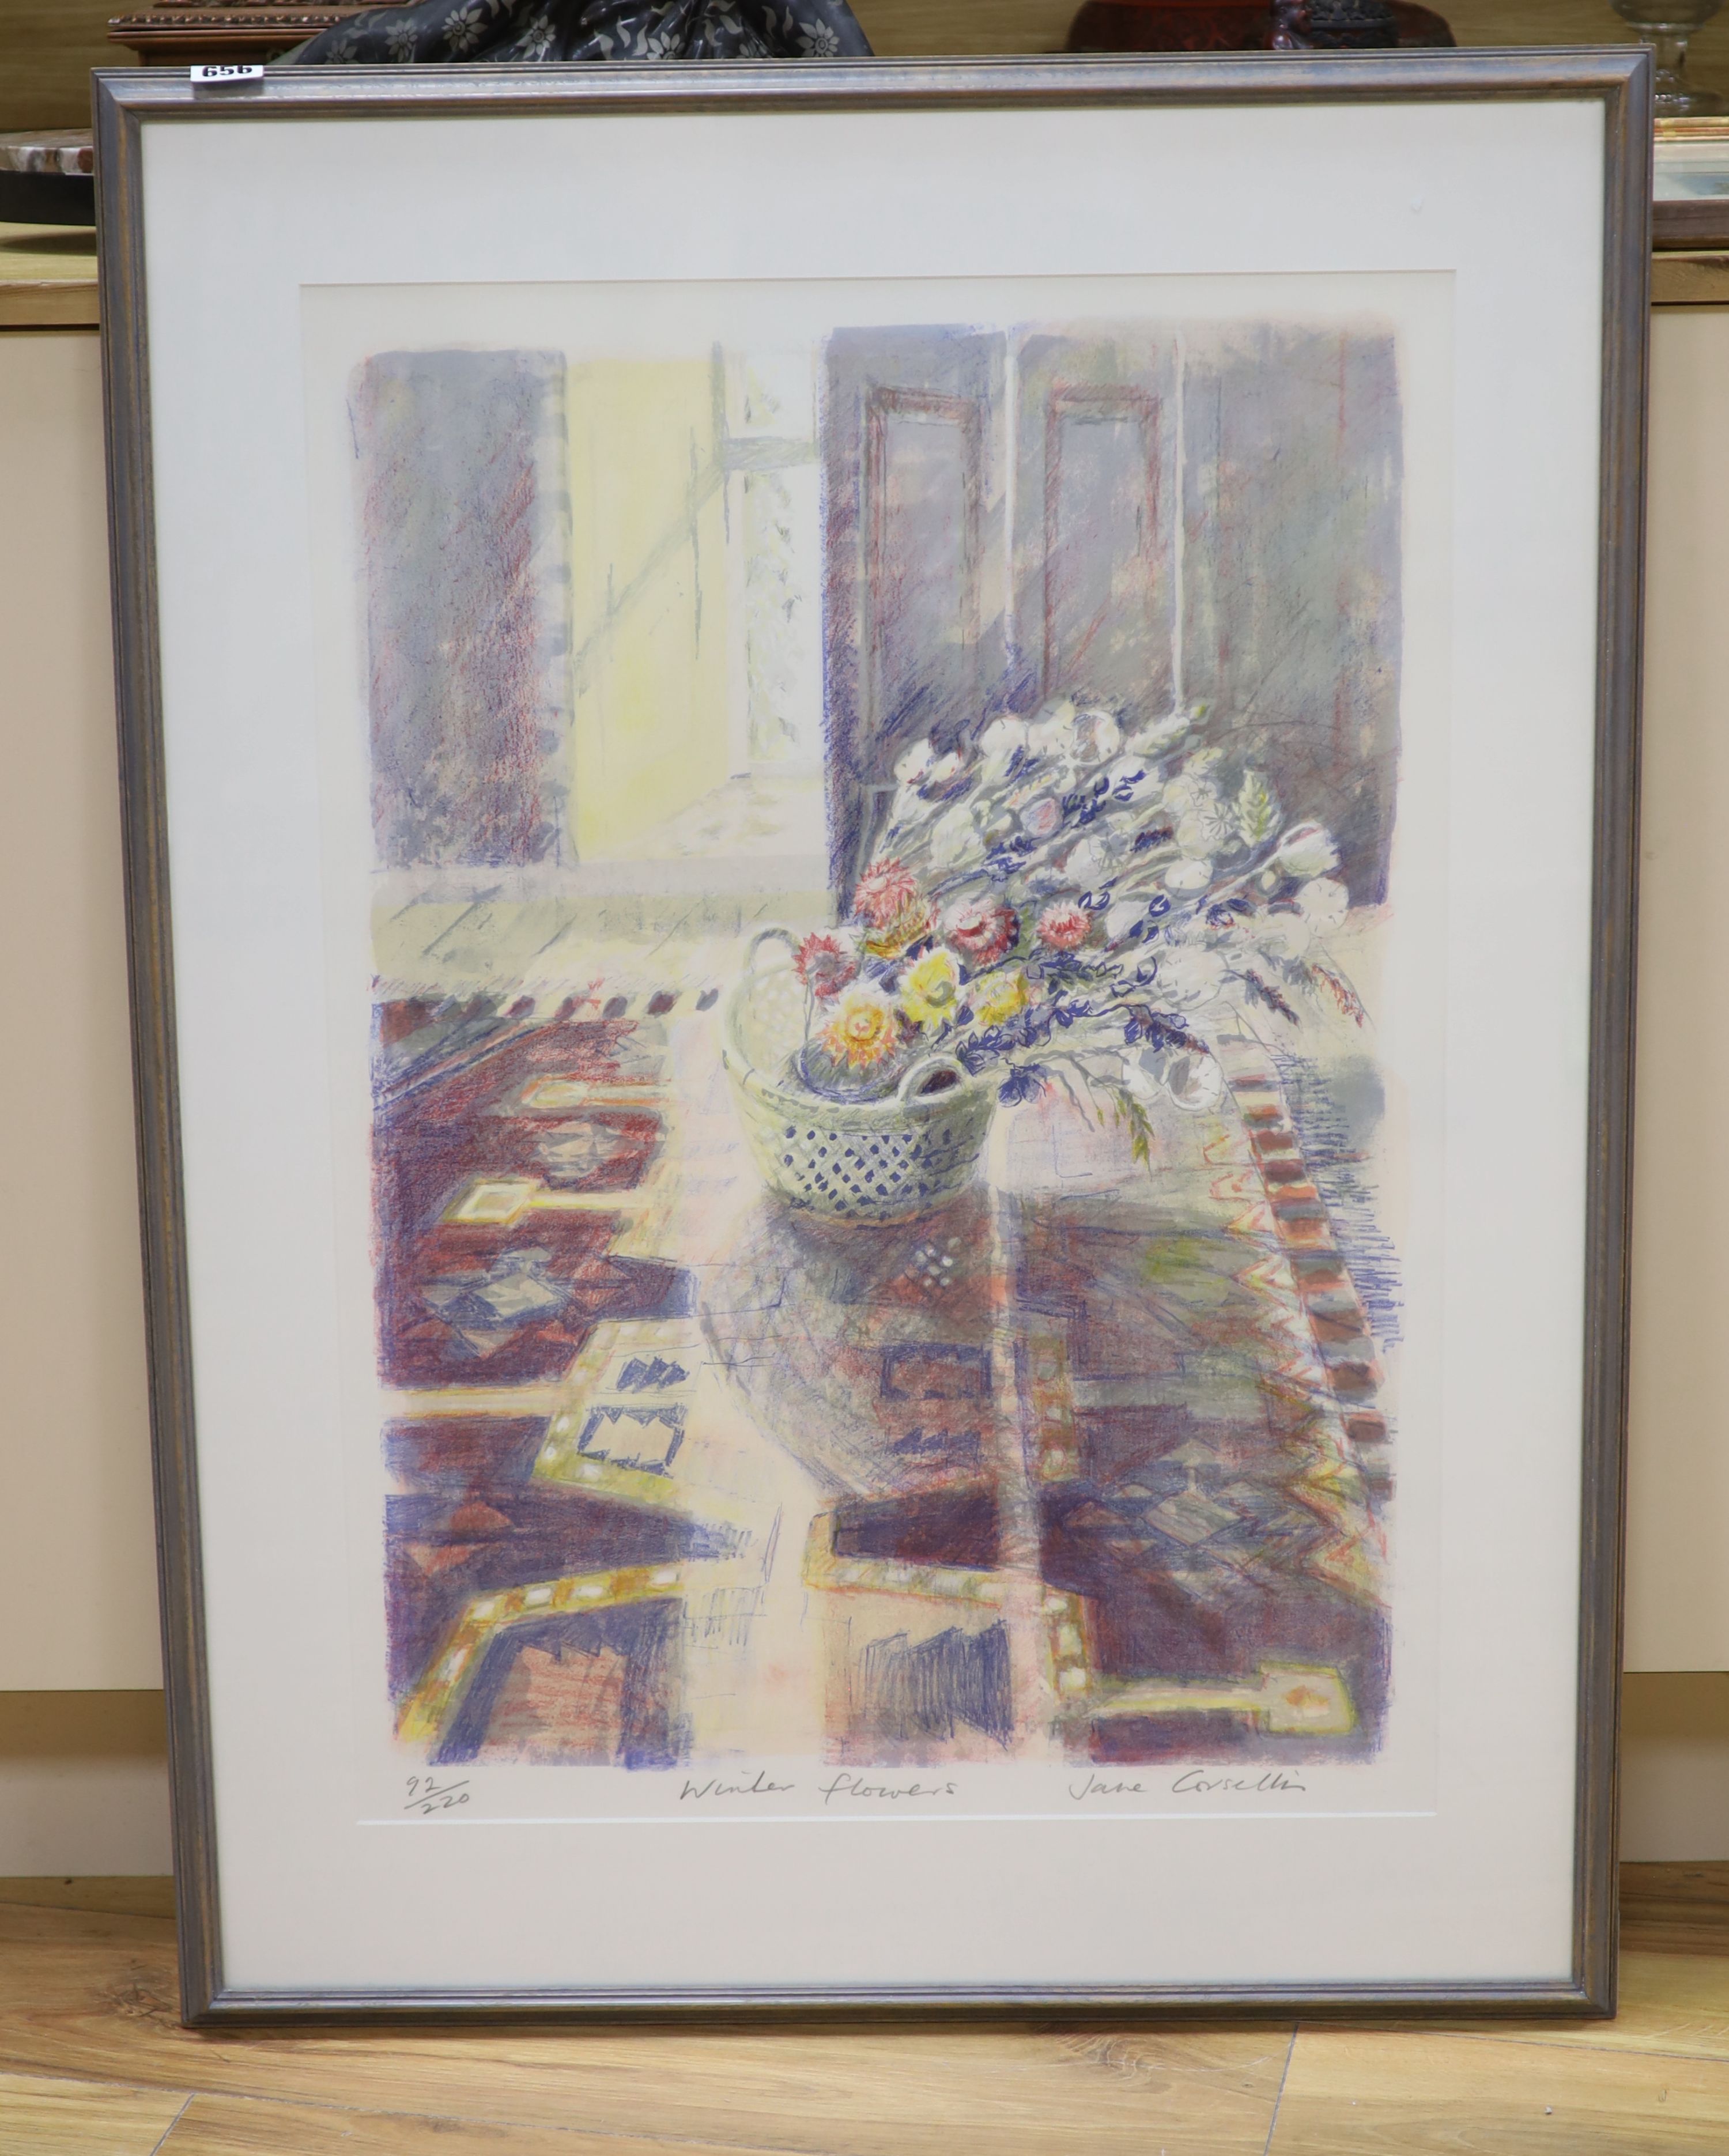 Jane Carsellis, lithograph, Winter flowers, signed in pencil, 92/220, overall 71 x 51cm